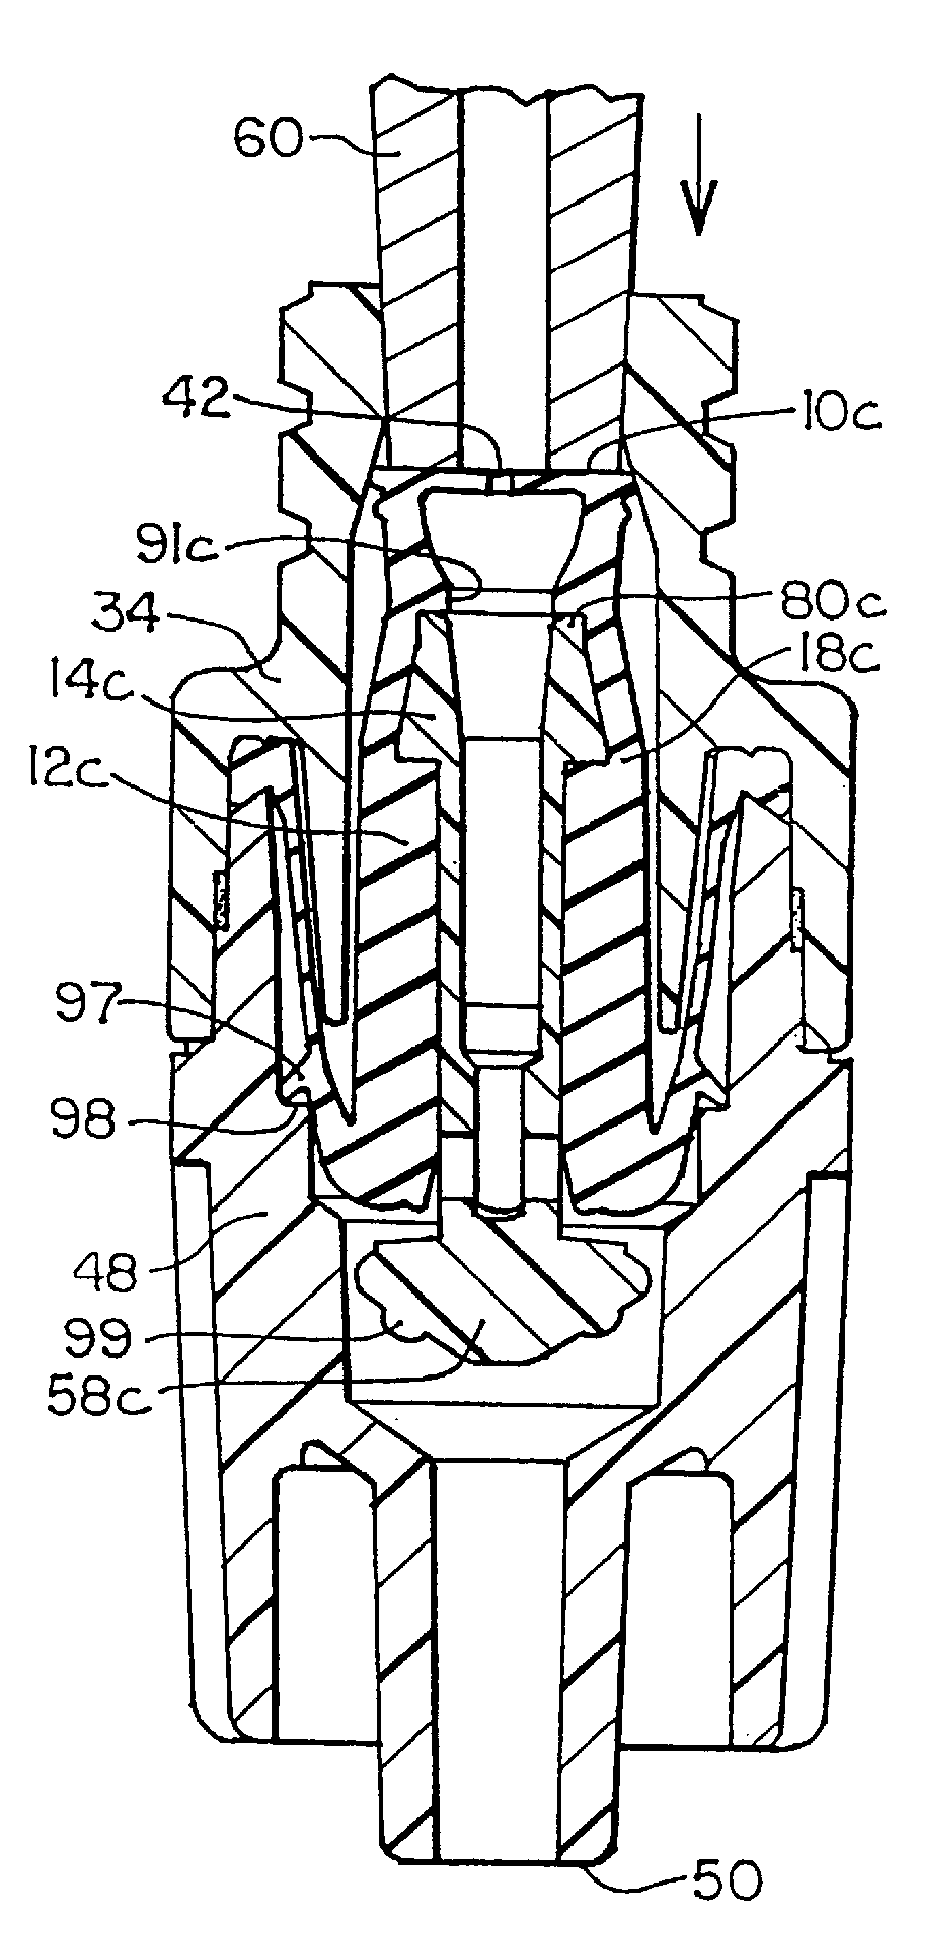 Self-Lubricating Elastomeric Components for Use in Medical Devices